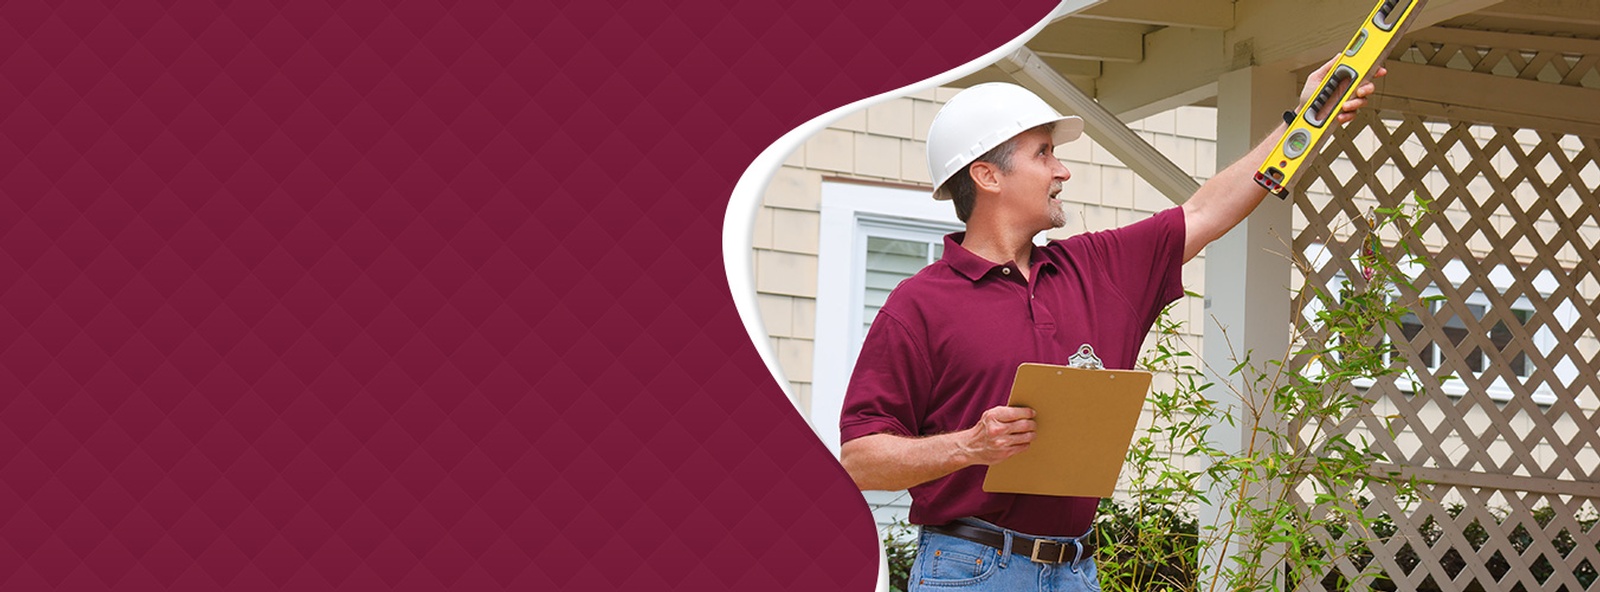 Home Inspection Services In St. Catharines, ON